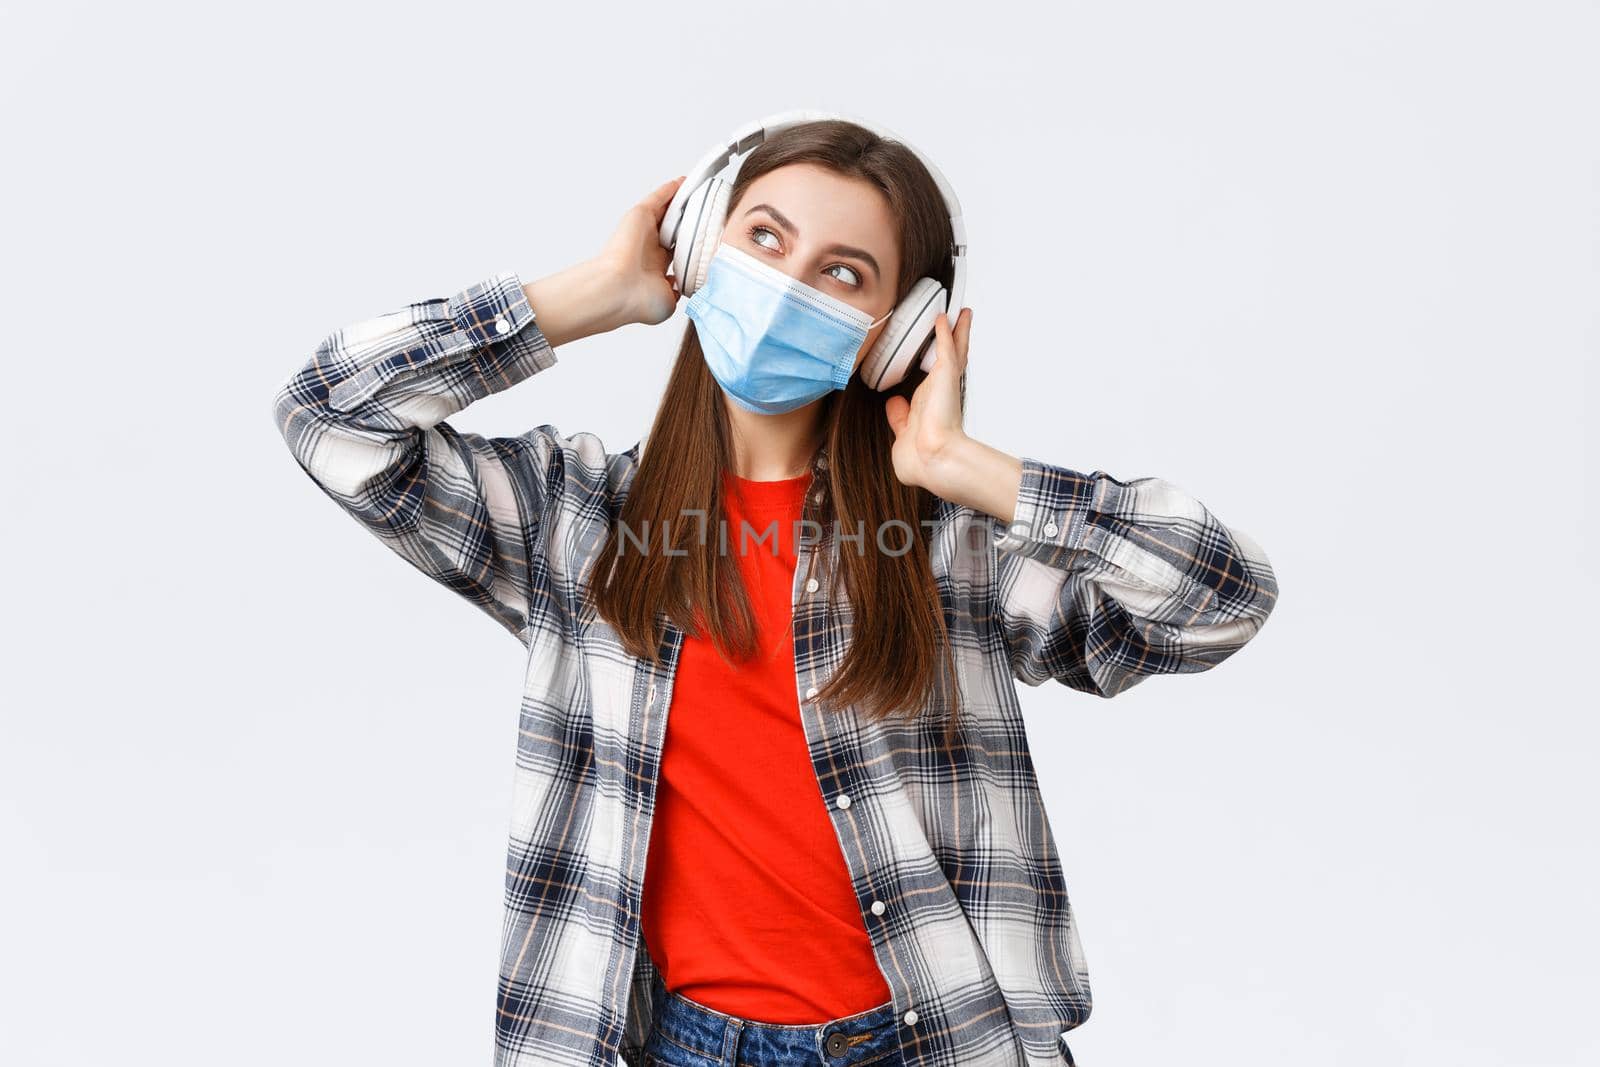 Social distancing, leisure and lifestyle on covid-19 outbreak, coronavirus concept. Happy carefree attractive girl in medical mask, look away dreamy, imaging while listening music in headphones.